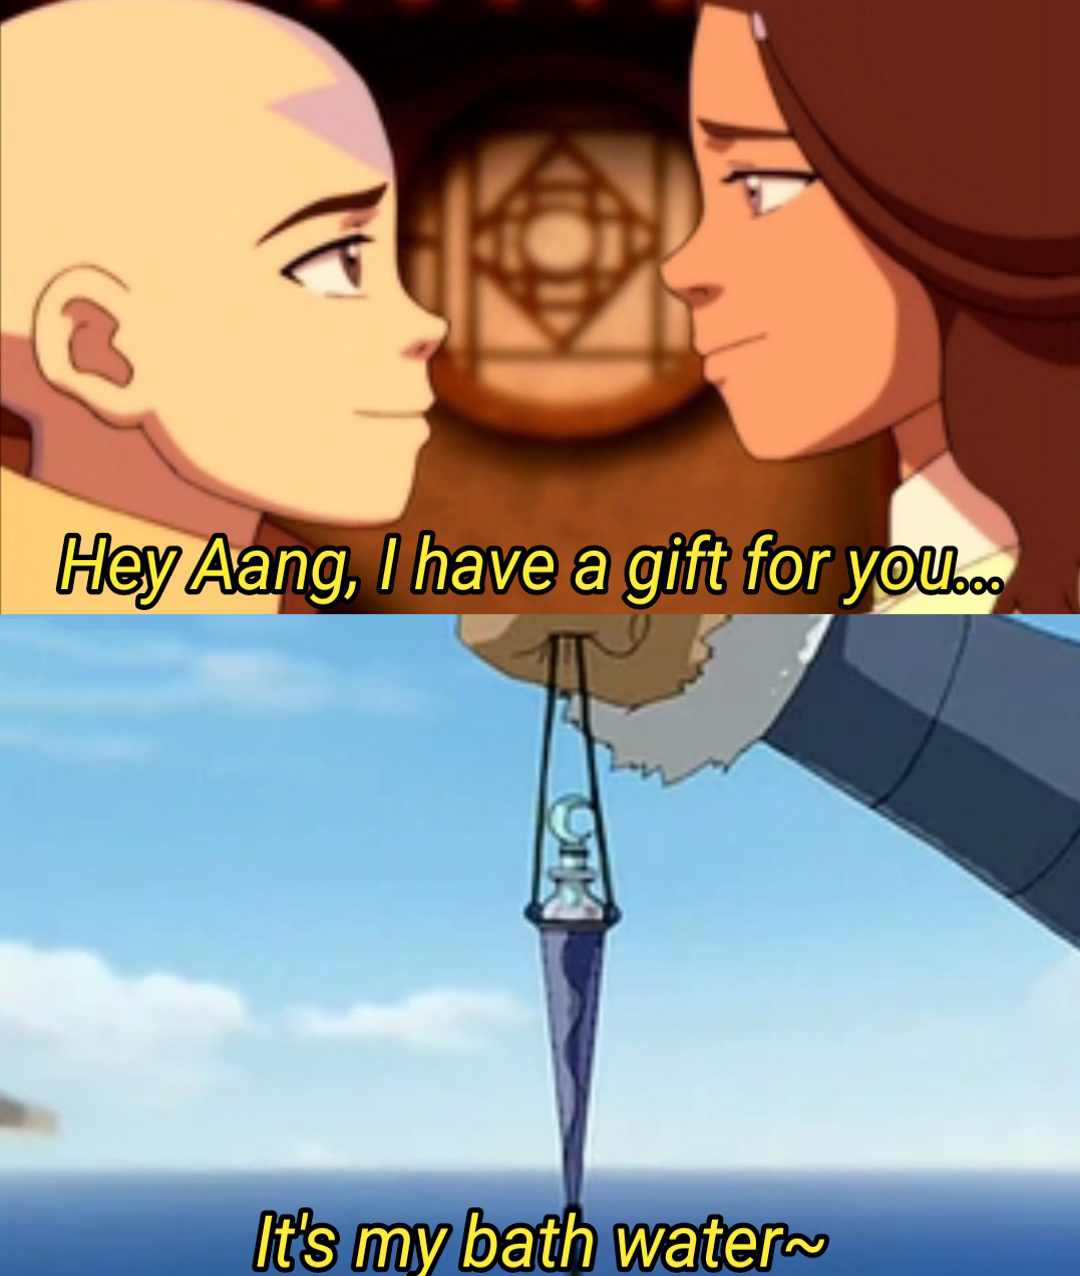 funny friday memes - have a gift for you meme - Hey Aang, I have a gift for you... It's my bath water~